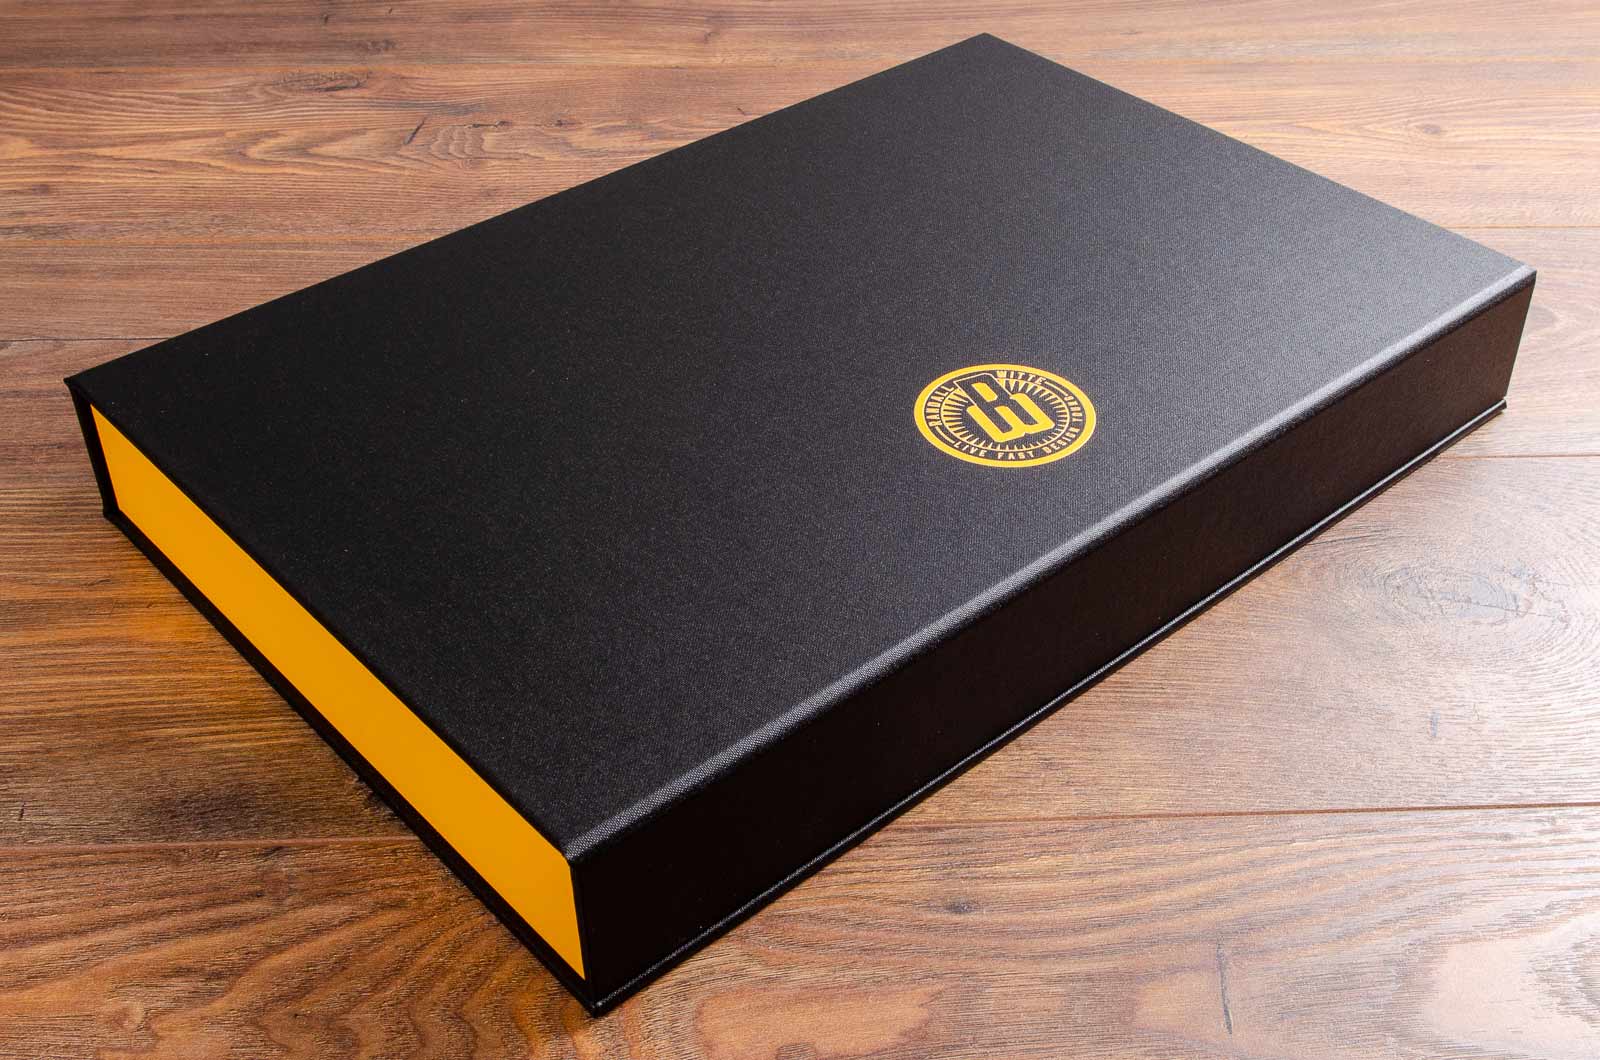 Portfolio box. Product - Dropback clamshell box. Size is 11x17 inches. Colour is black buckram and yellow buckram. Personalisation is full colour UV printing